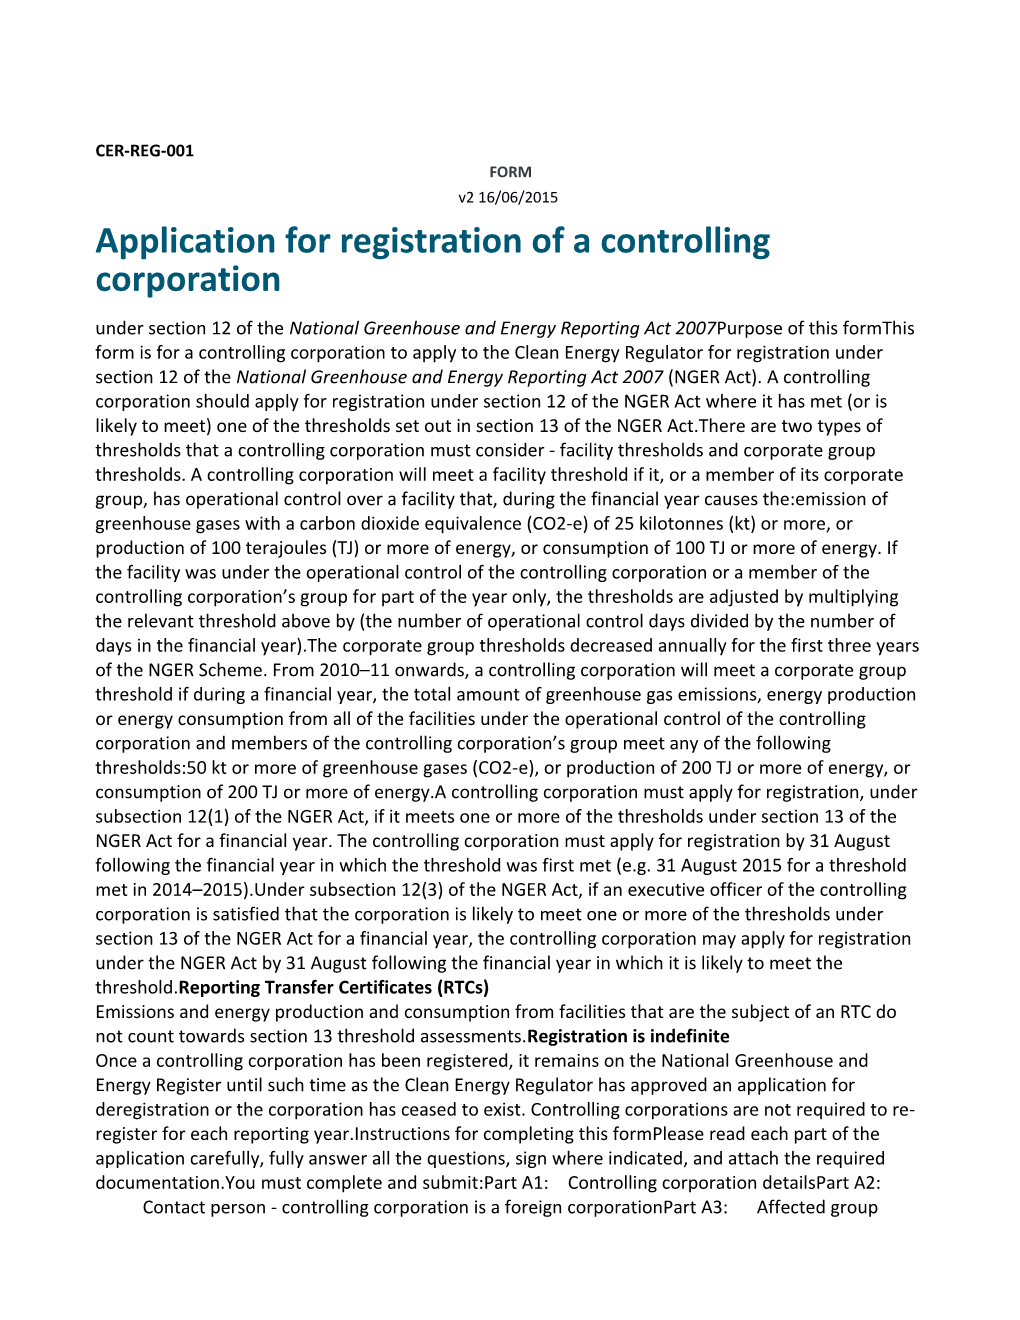 CER-REG-001 Application for Registration of a Controlling Corporation